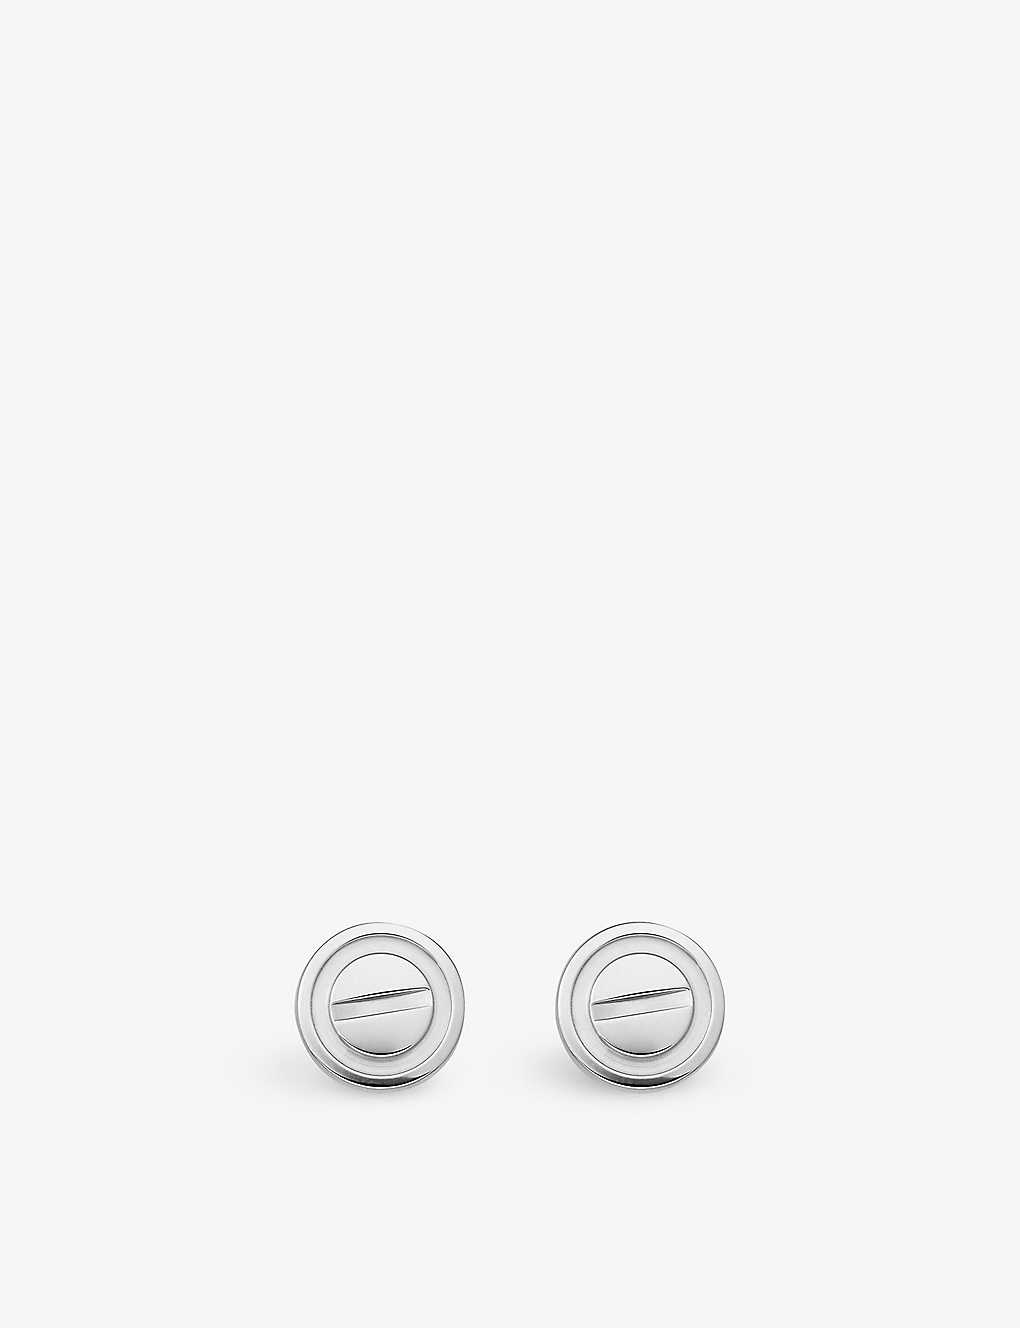 Cartier Womens White Gold Love 18ct White-gold Stud Earrings